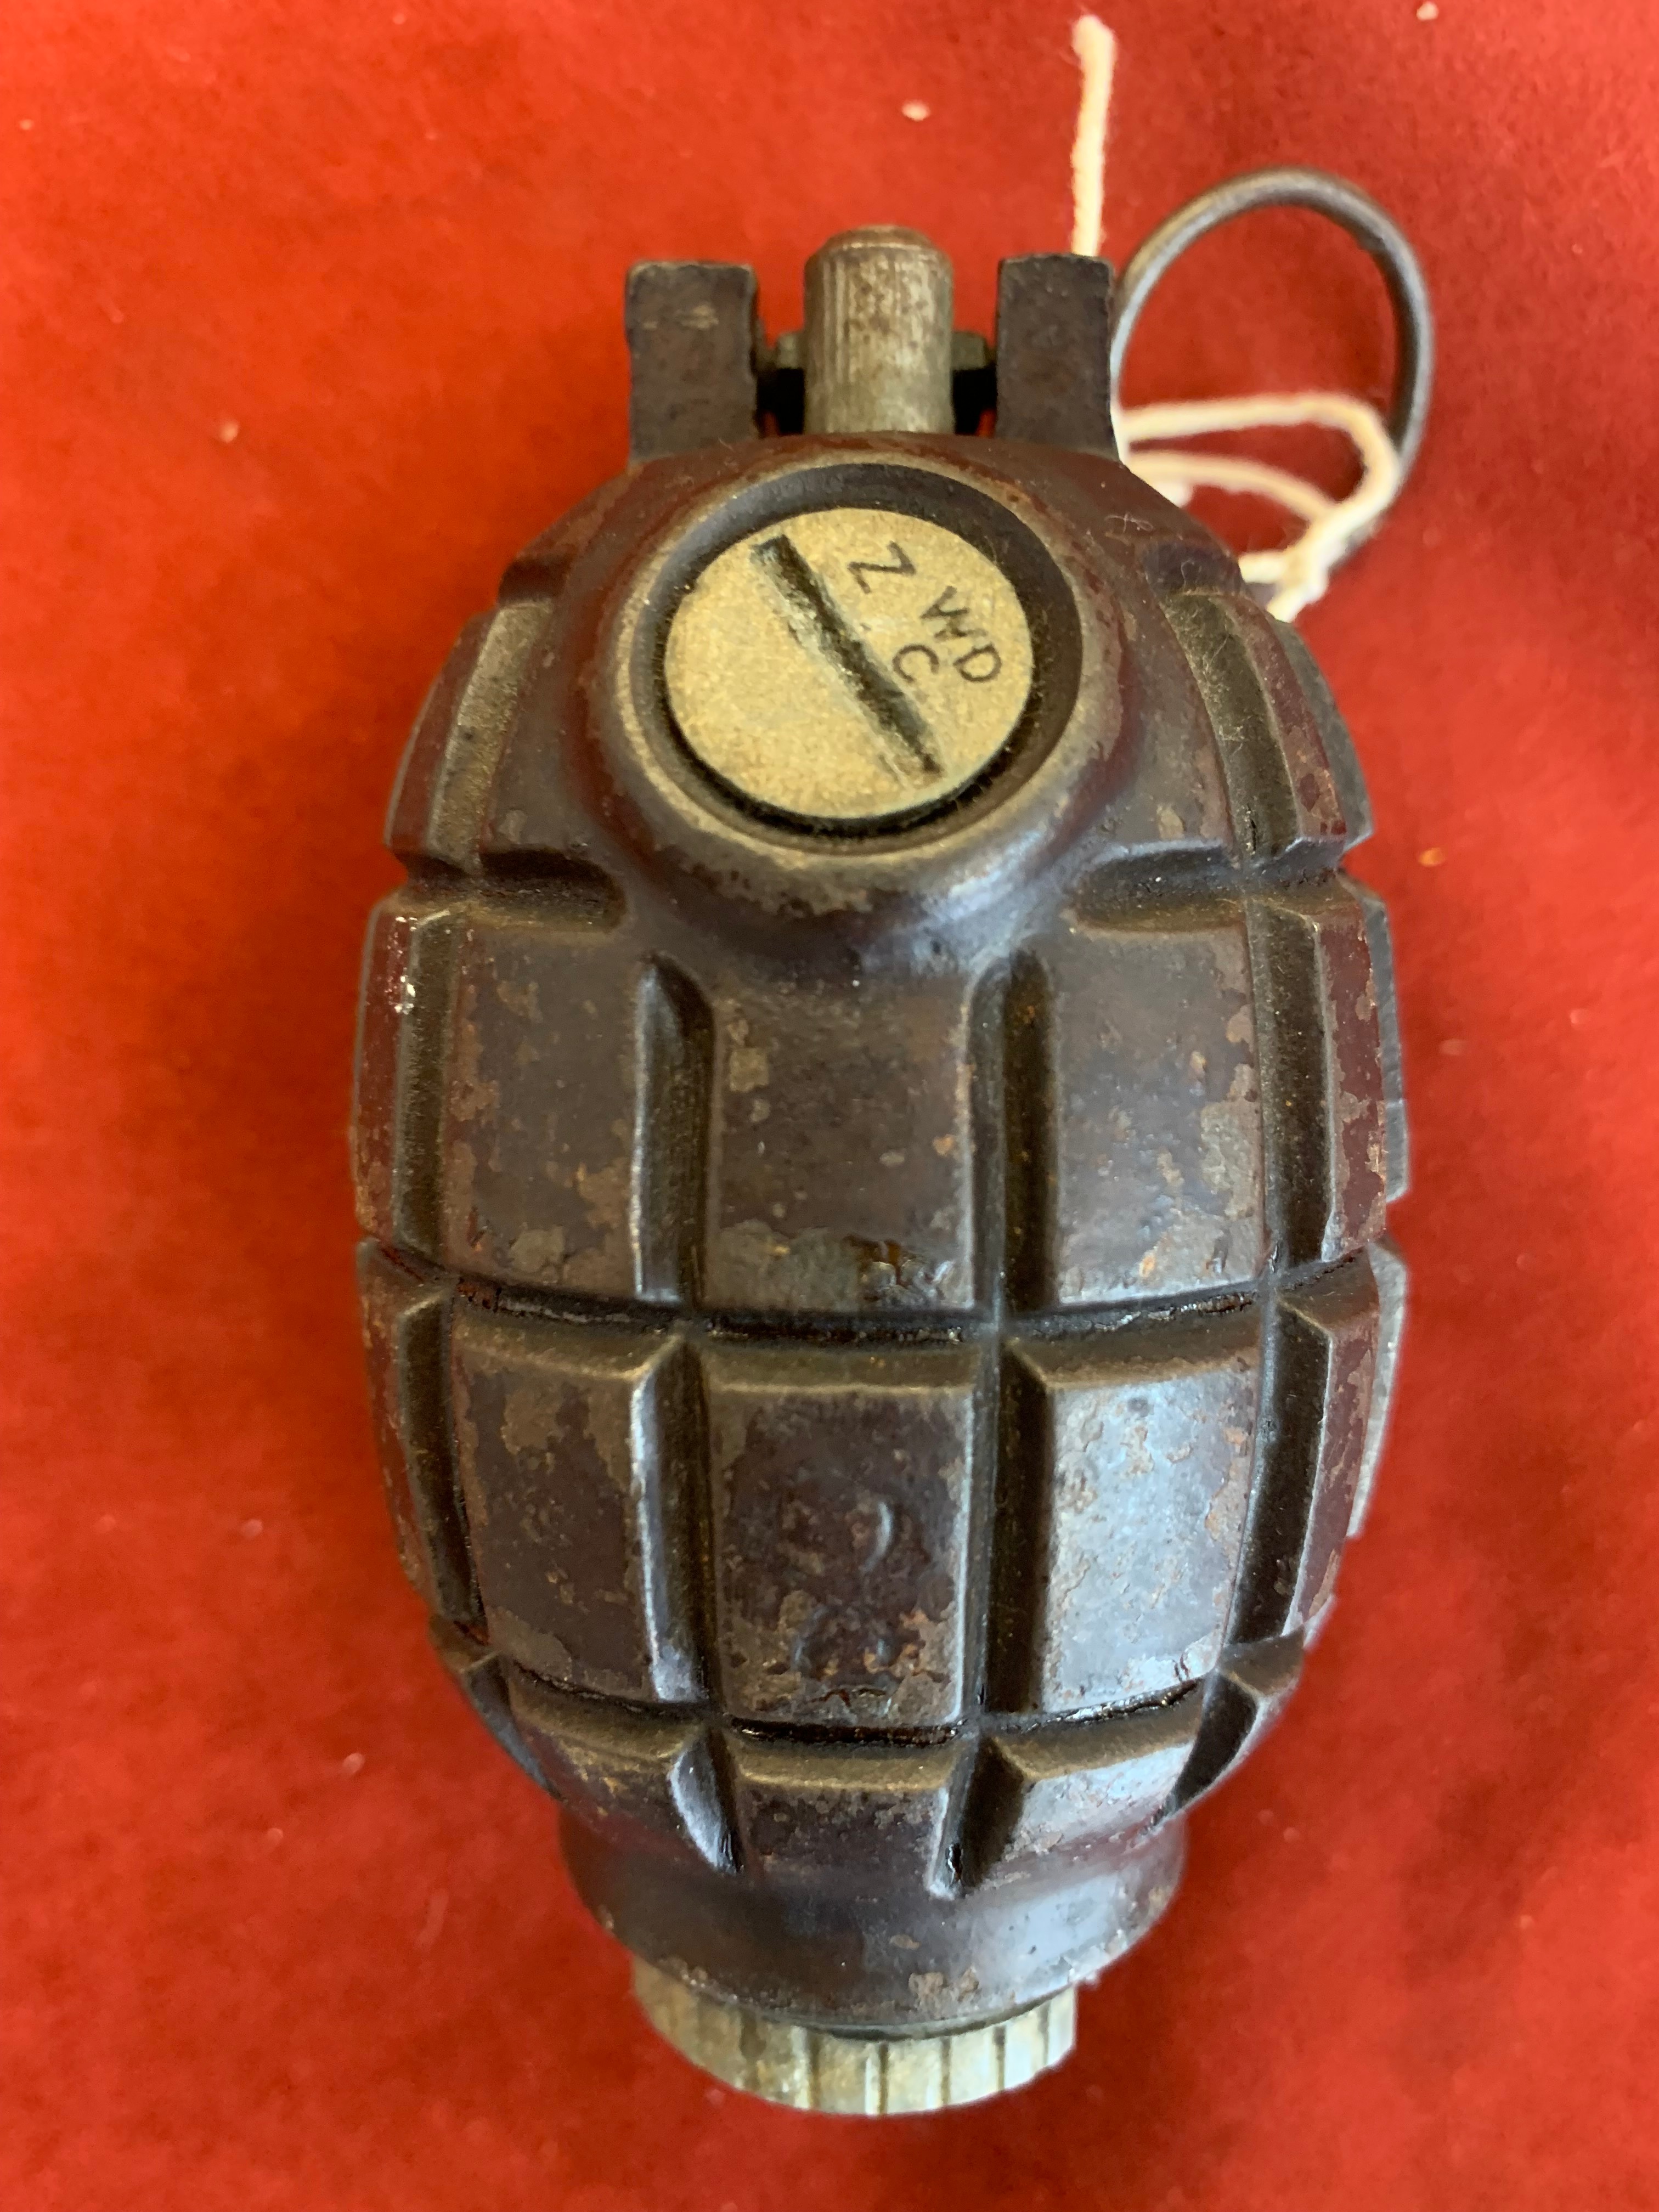 British WWII No.36 Mills Bomb made by Qualcast, Derby. With original paint and components